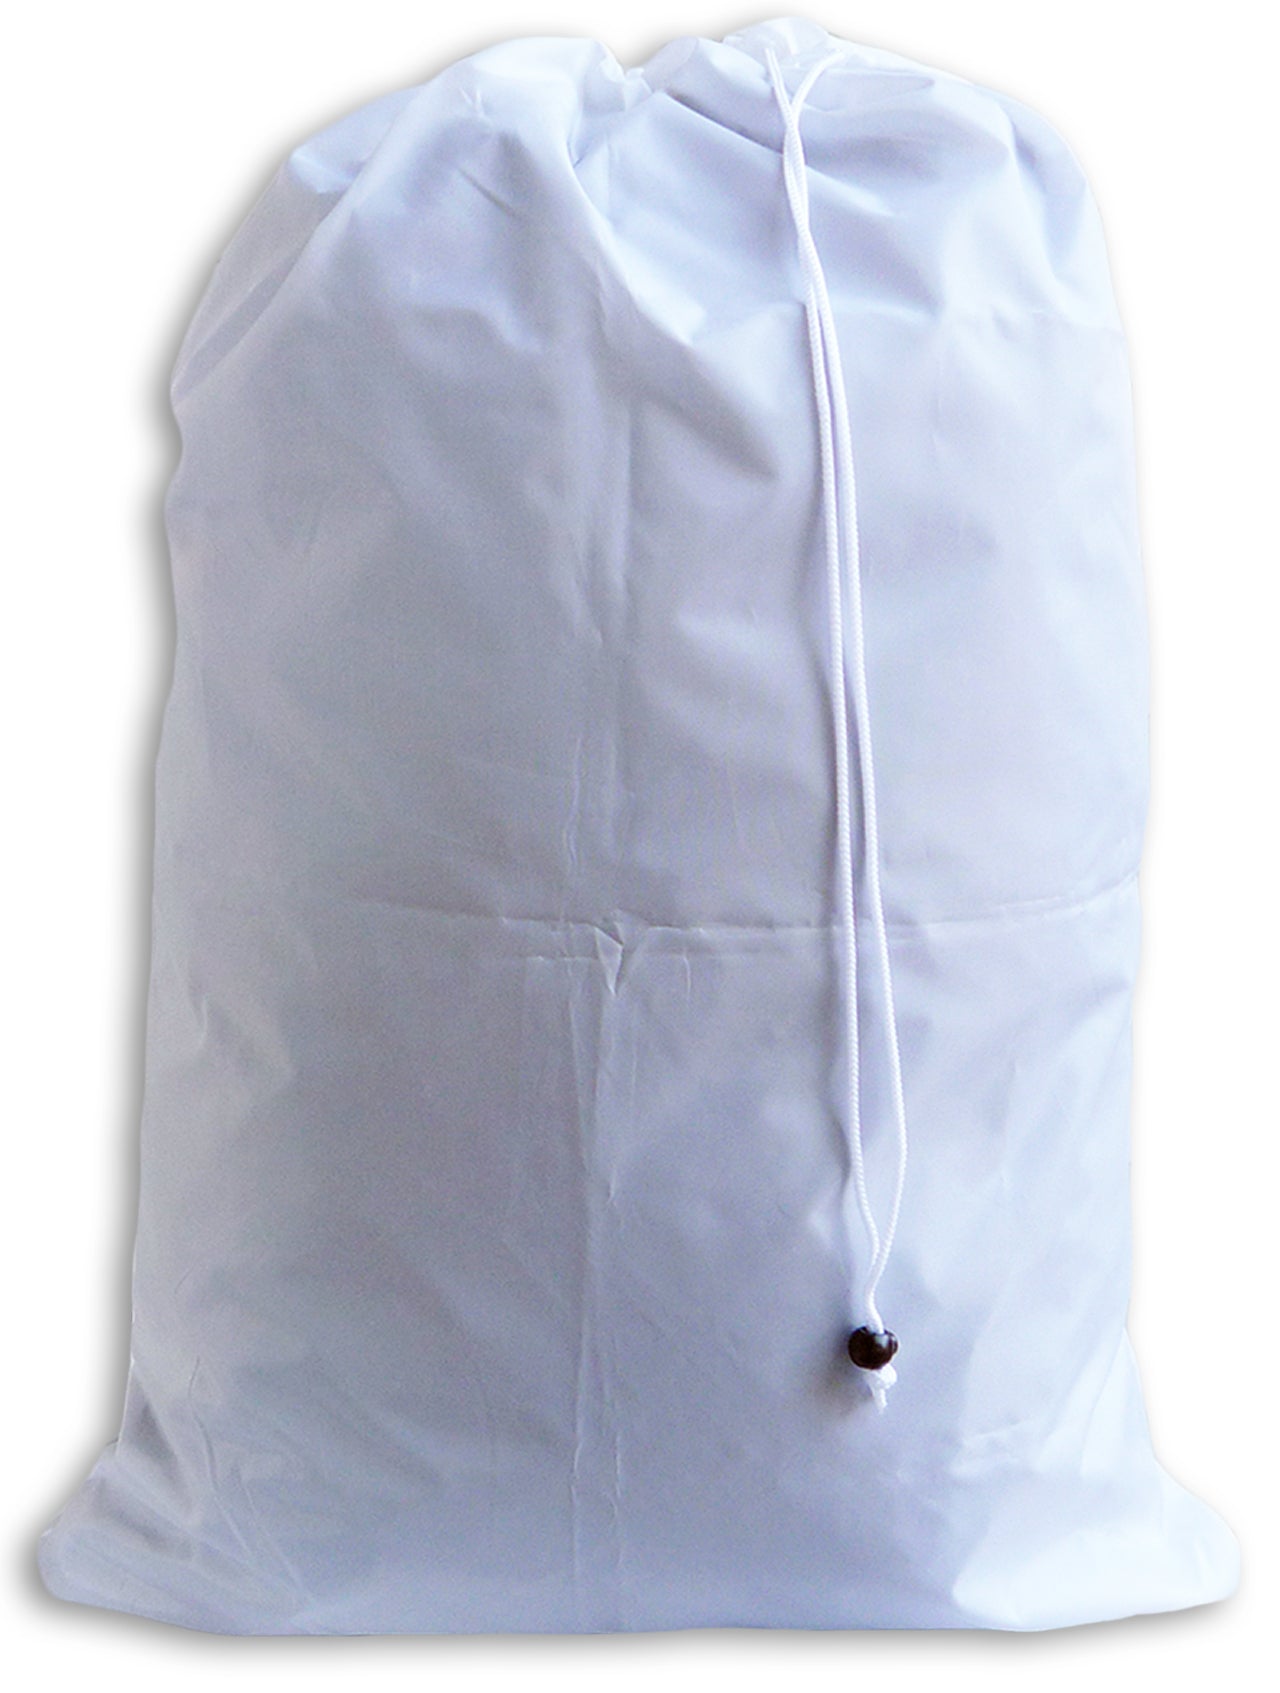 Small Laundry Bag, White